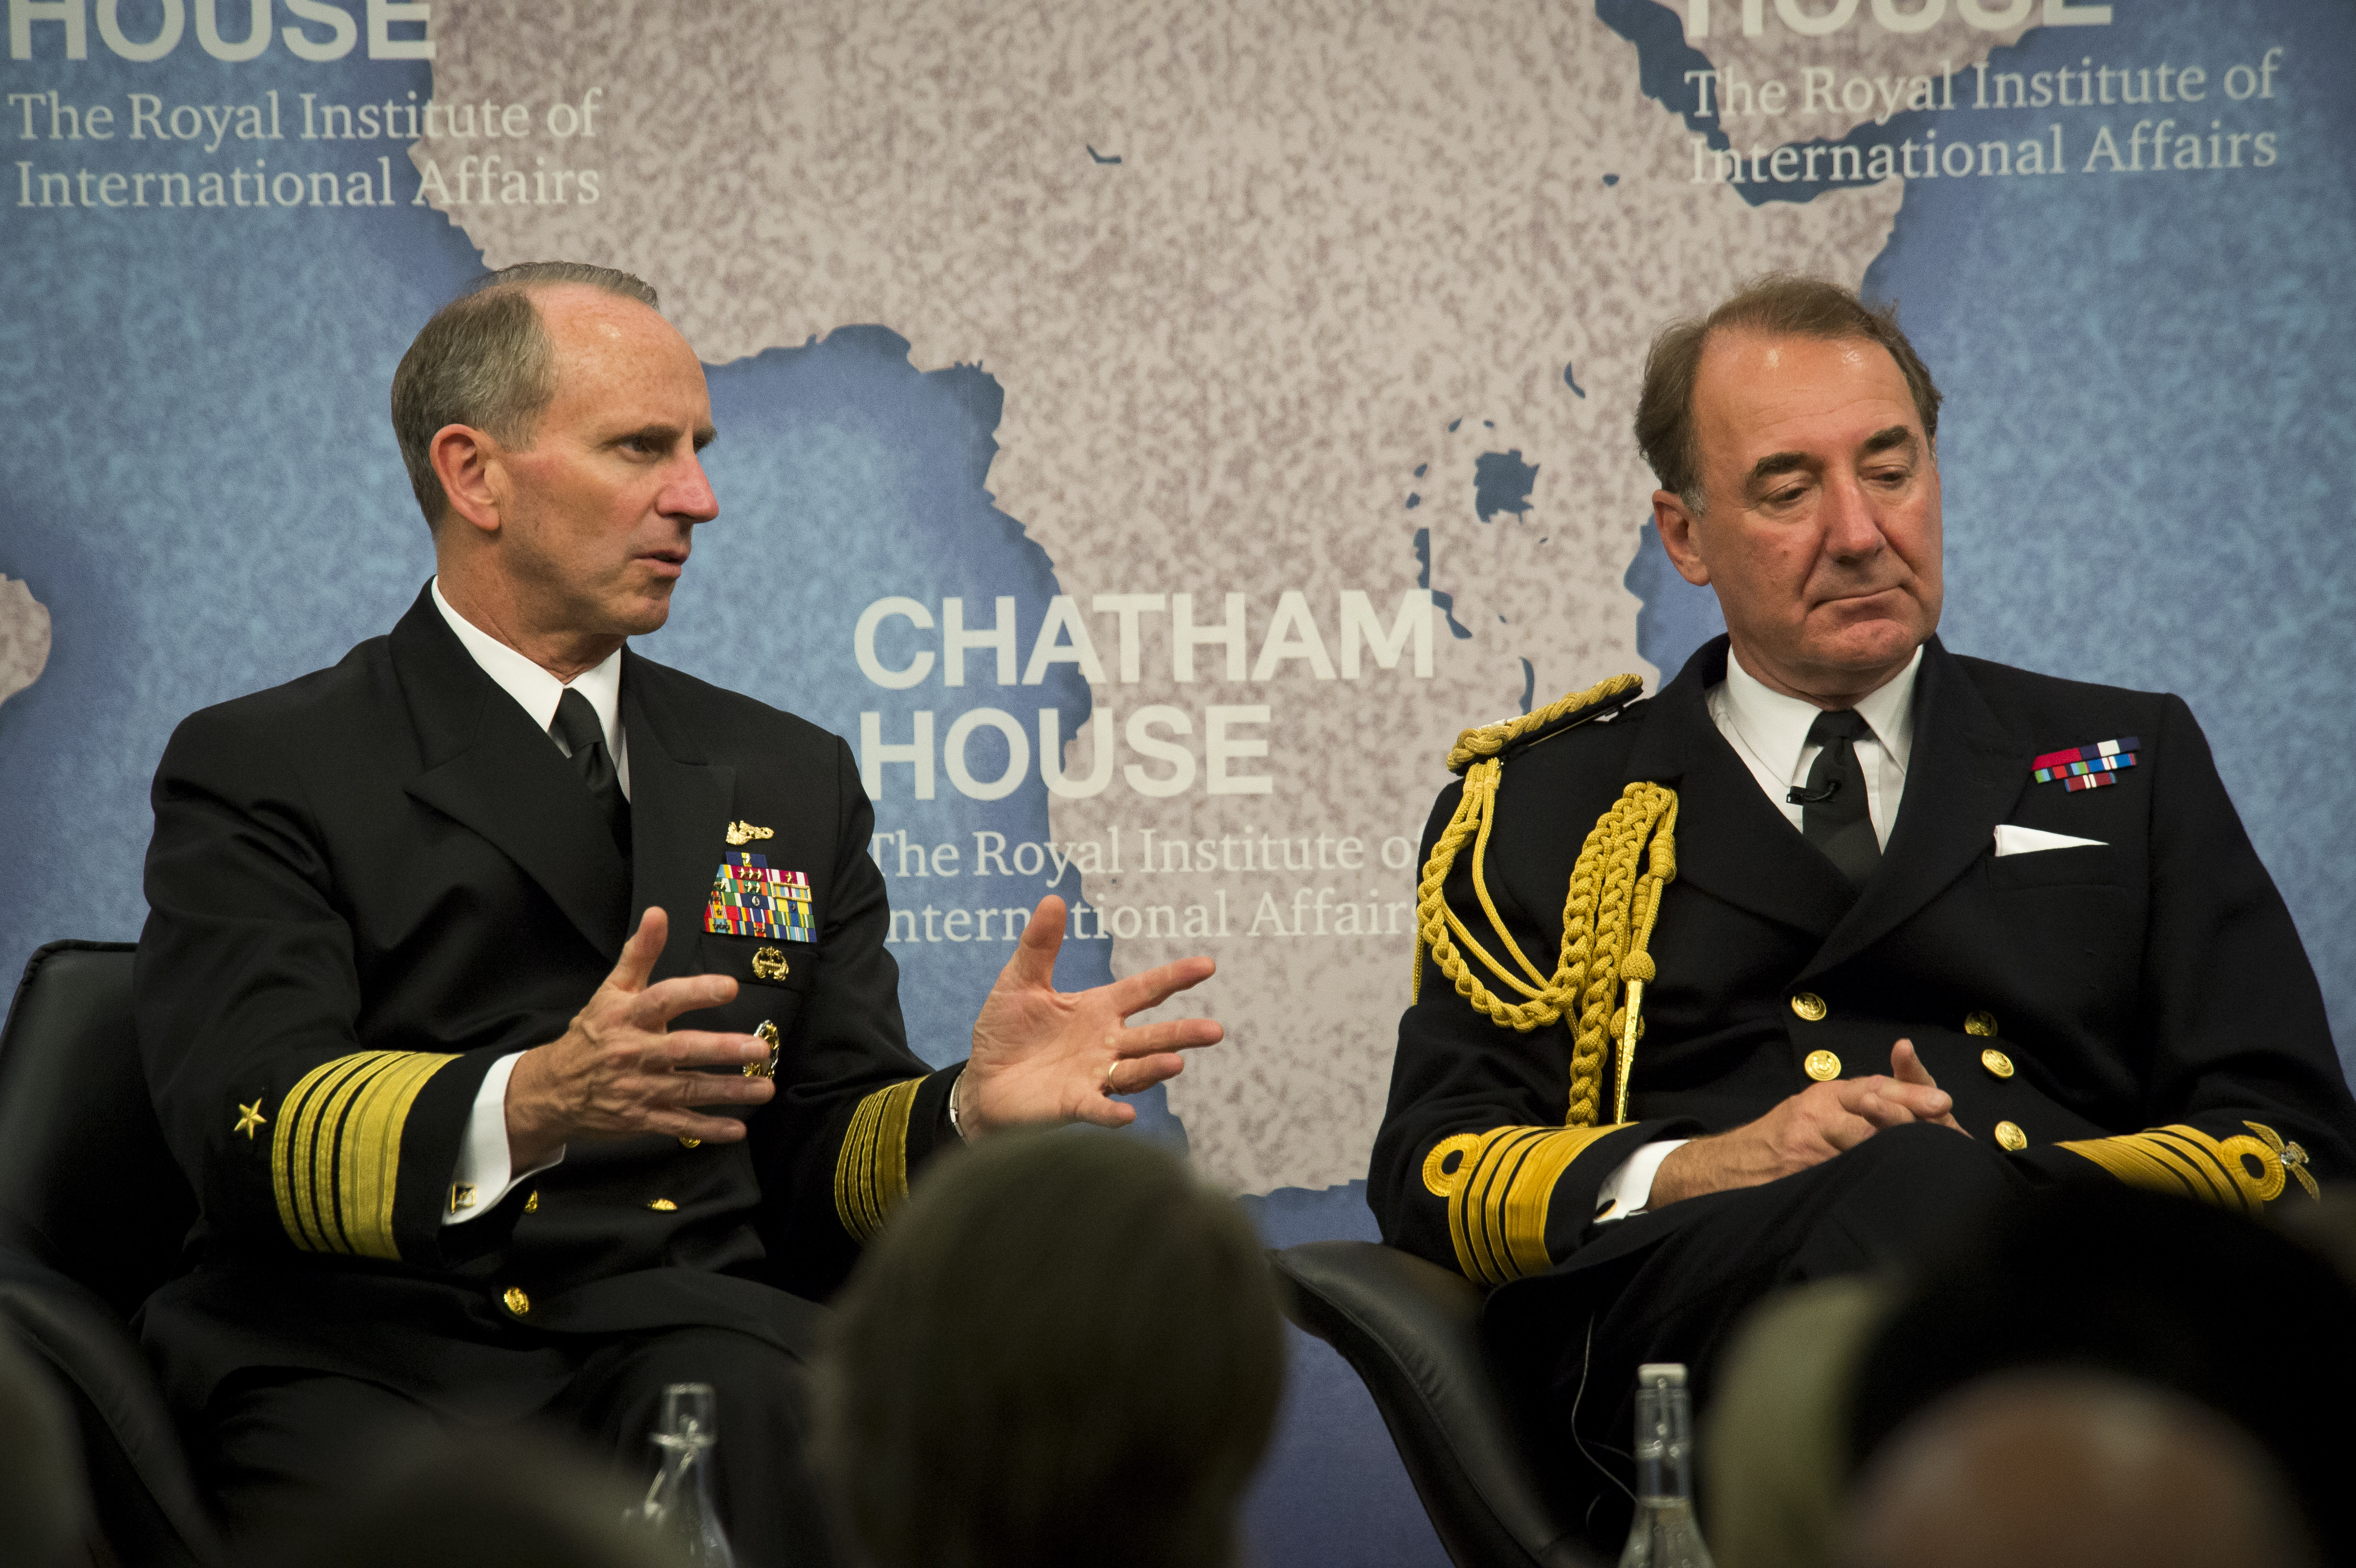 Chief of Naval Operations (CNO) Adm. Jonathan Greenert and First Sea Lord of the Royal Navy Adm. Sir George Zambellas participate in a moderated talk focused on the future of the British-American naval alliance at Chatham House, the Royal Institute of International Affairs on July 15, 2015. US Navy Photo